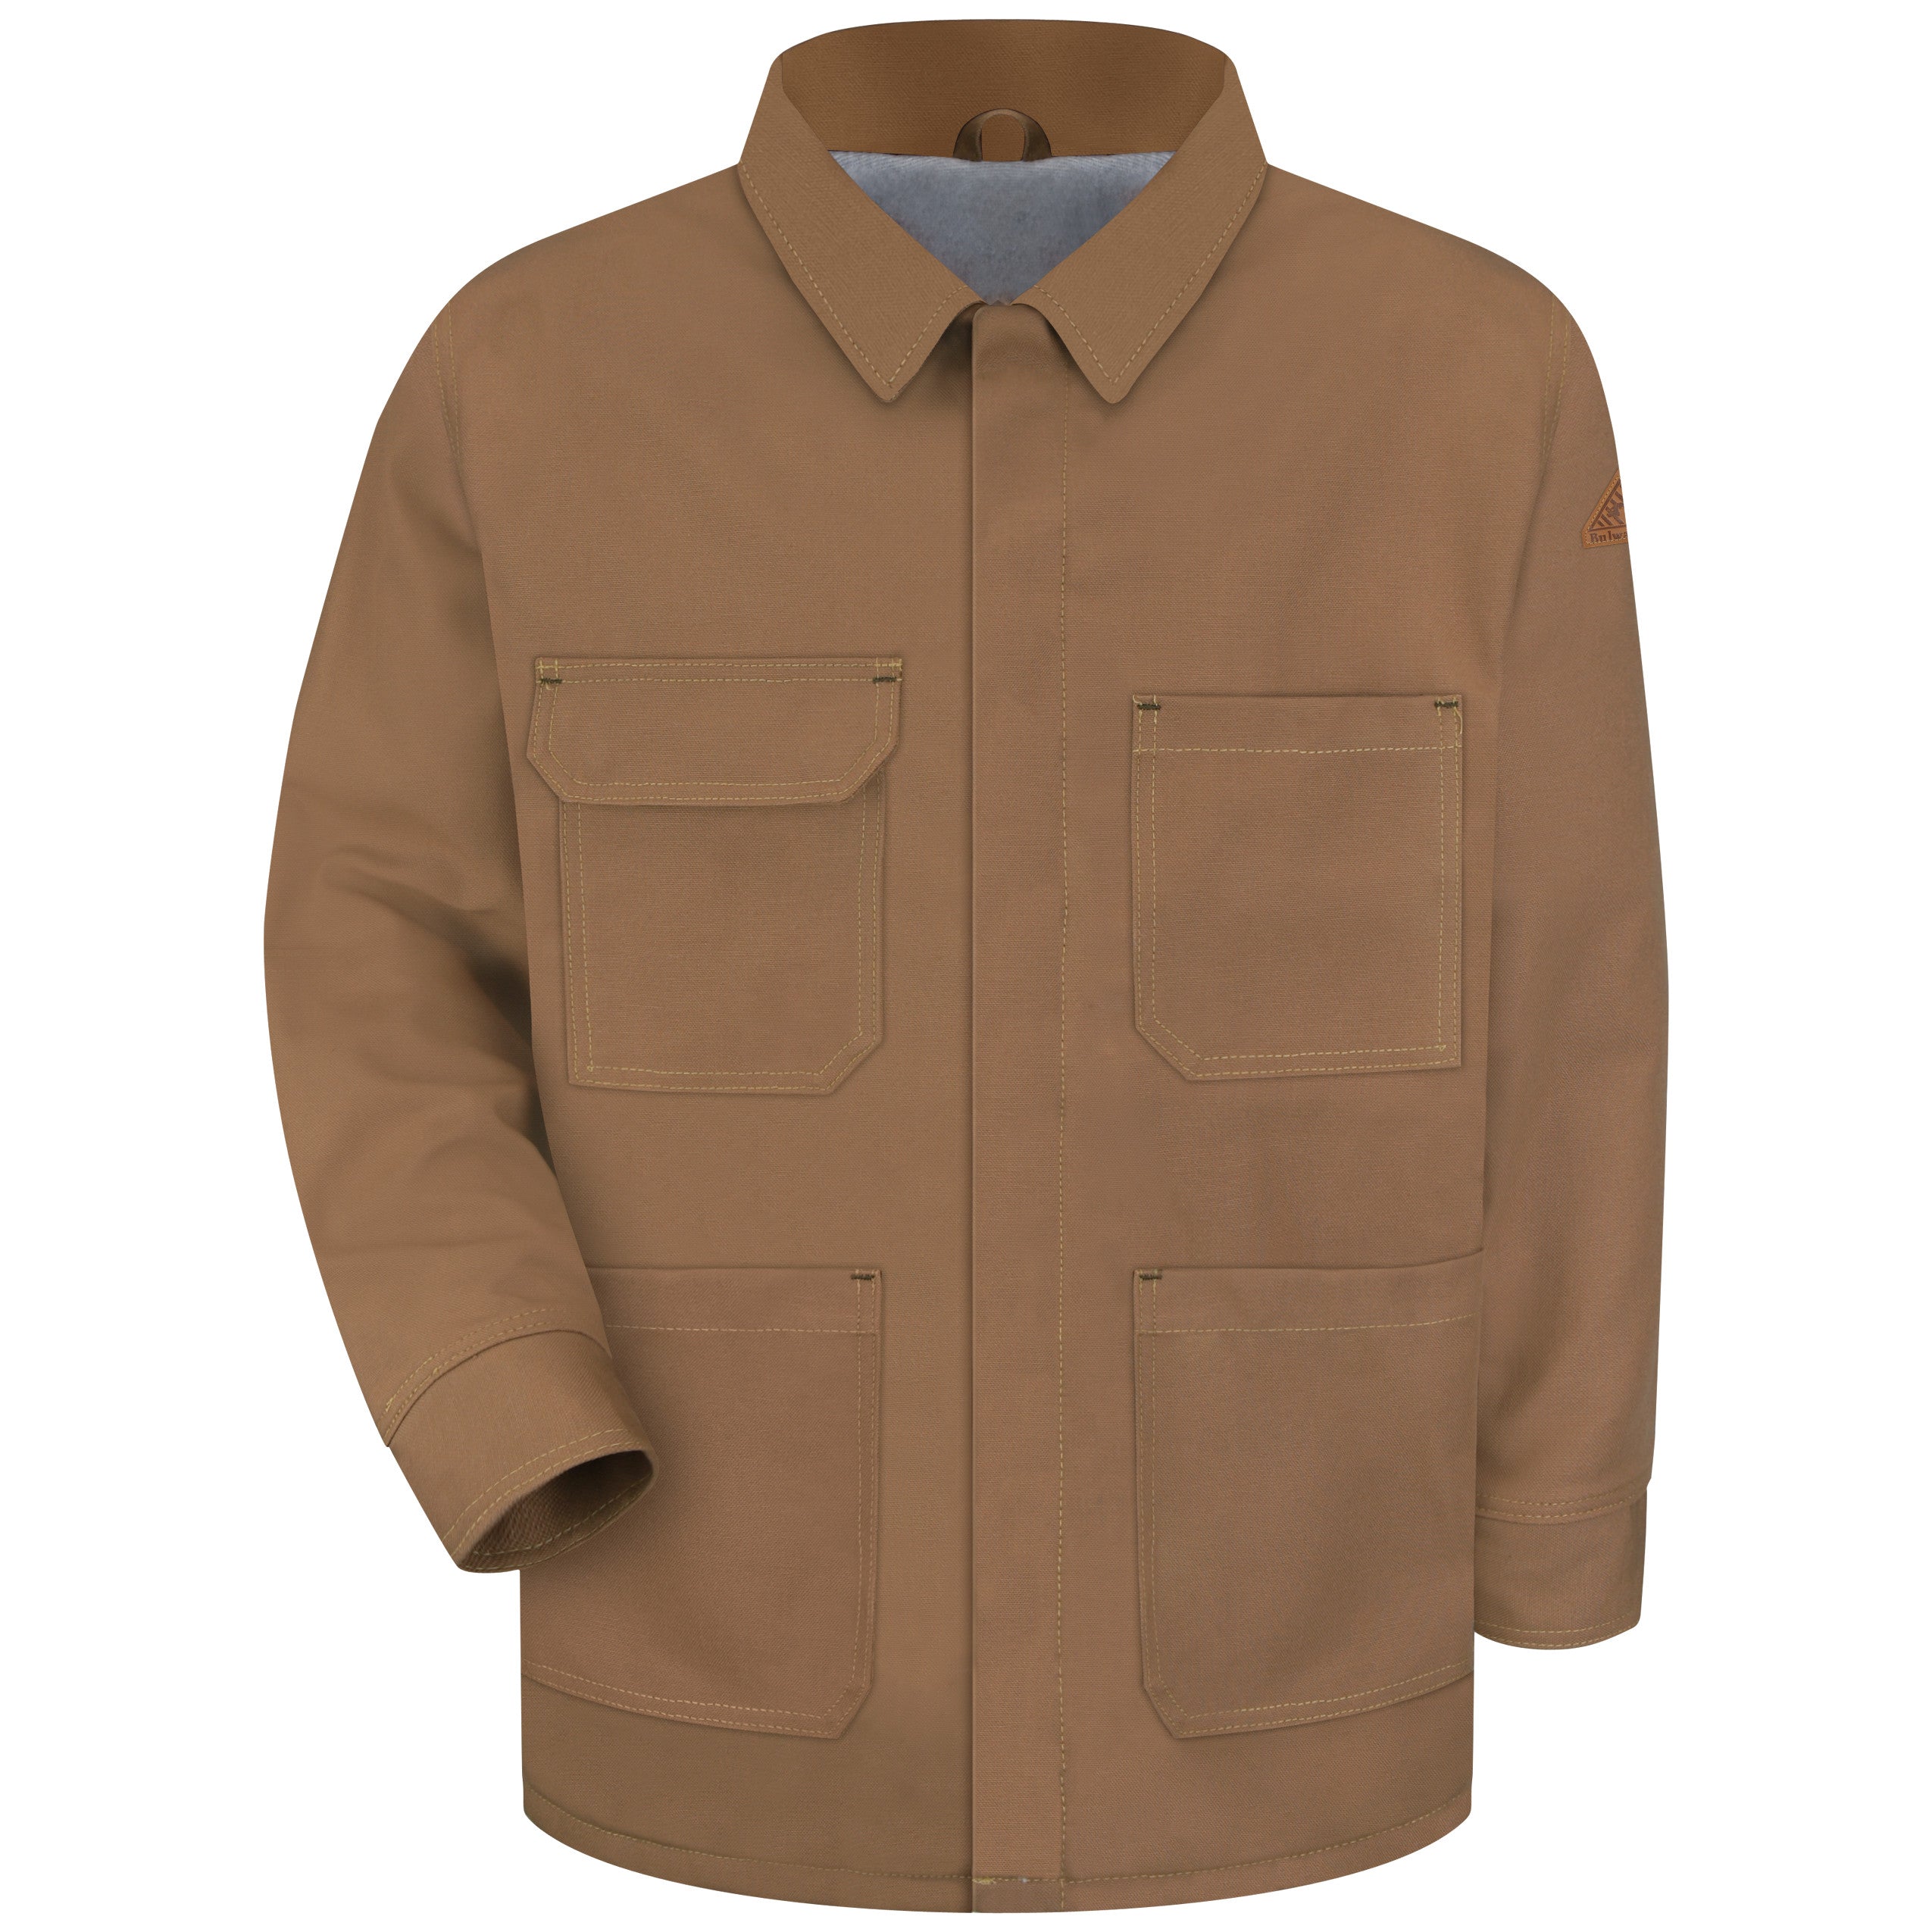 Outerwear - Lined JLC6 - Brown Duck